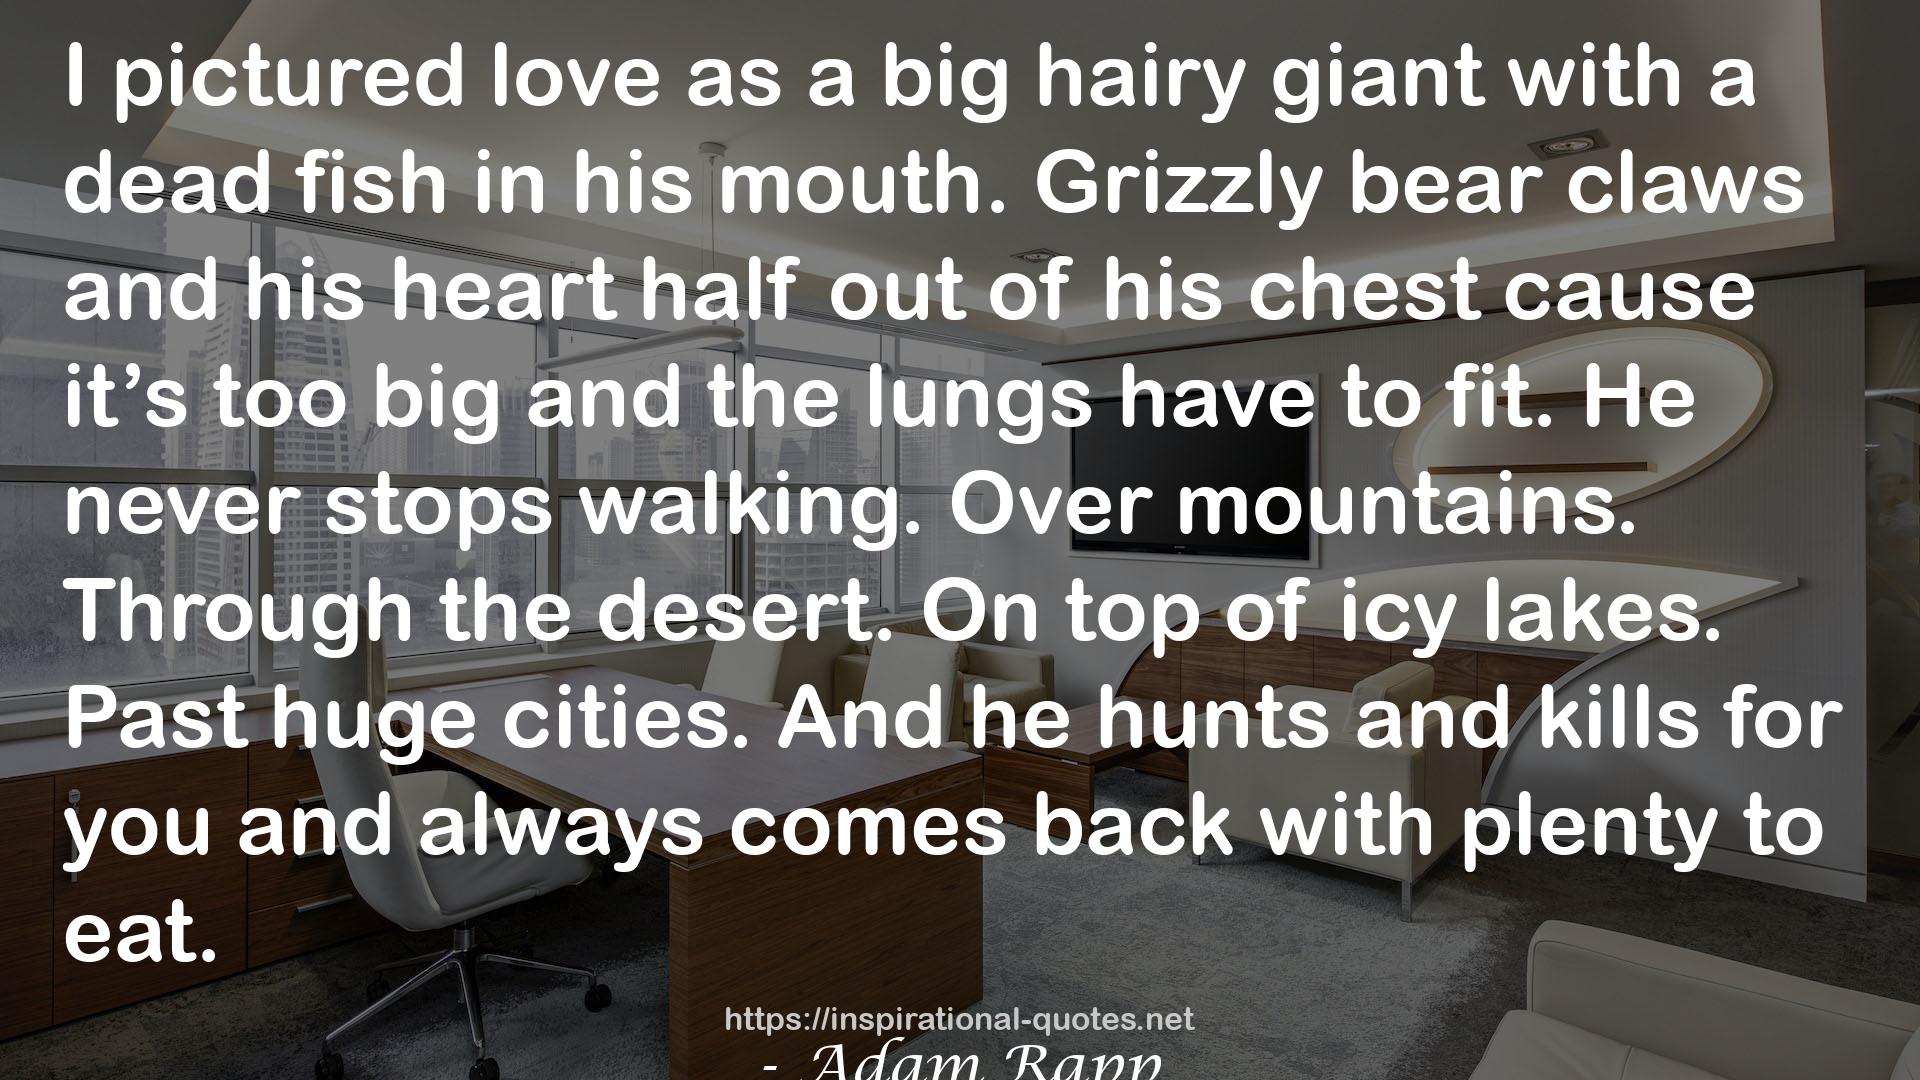 Grizzly bear claws  QUOTES